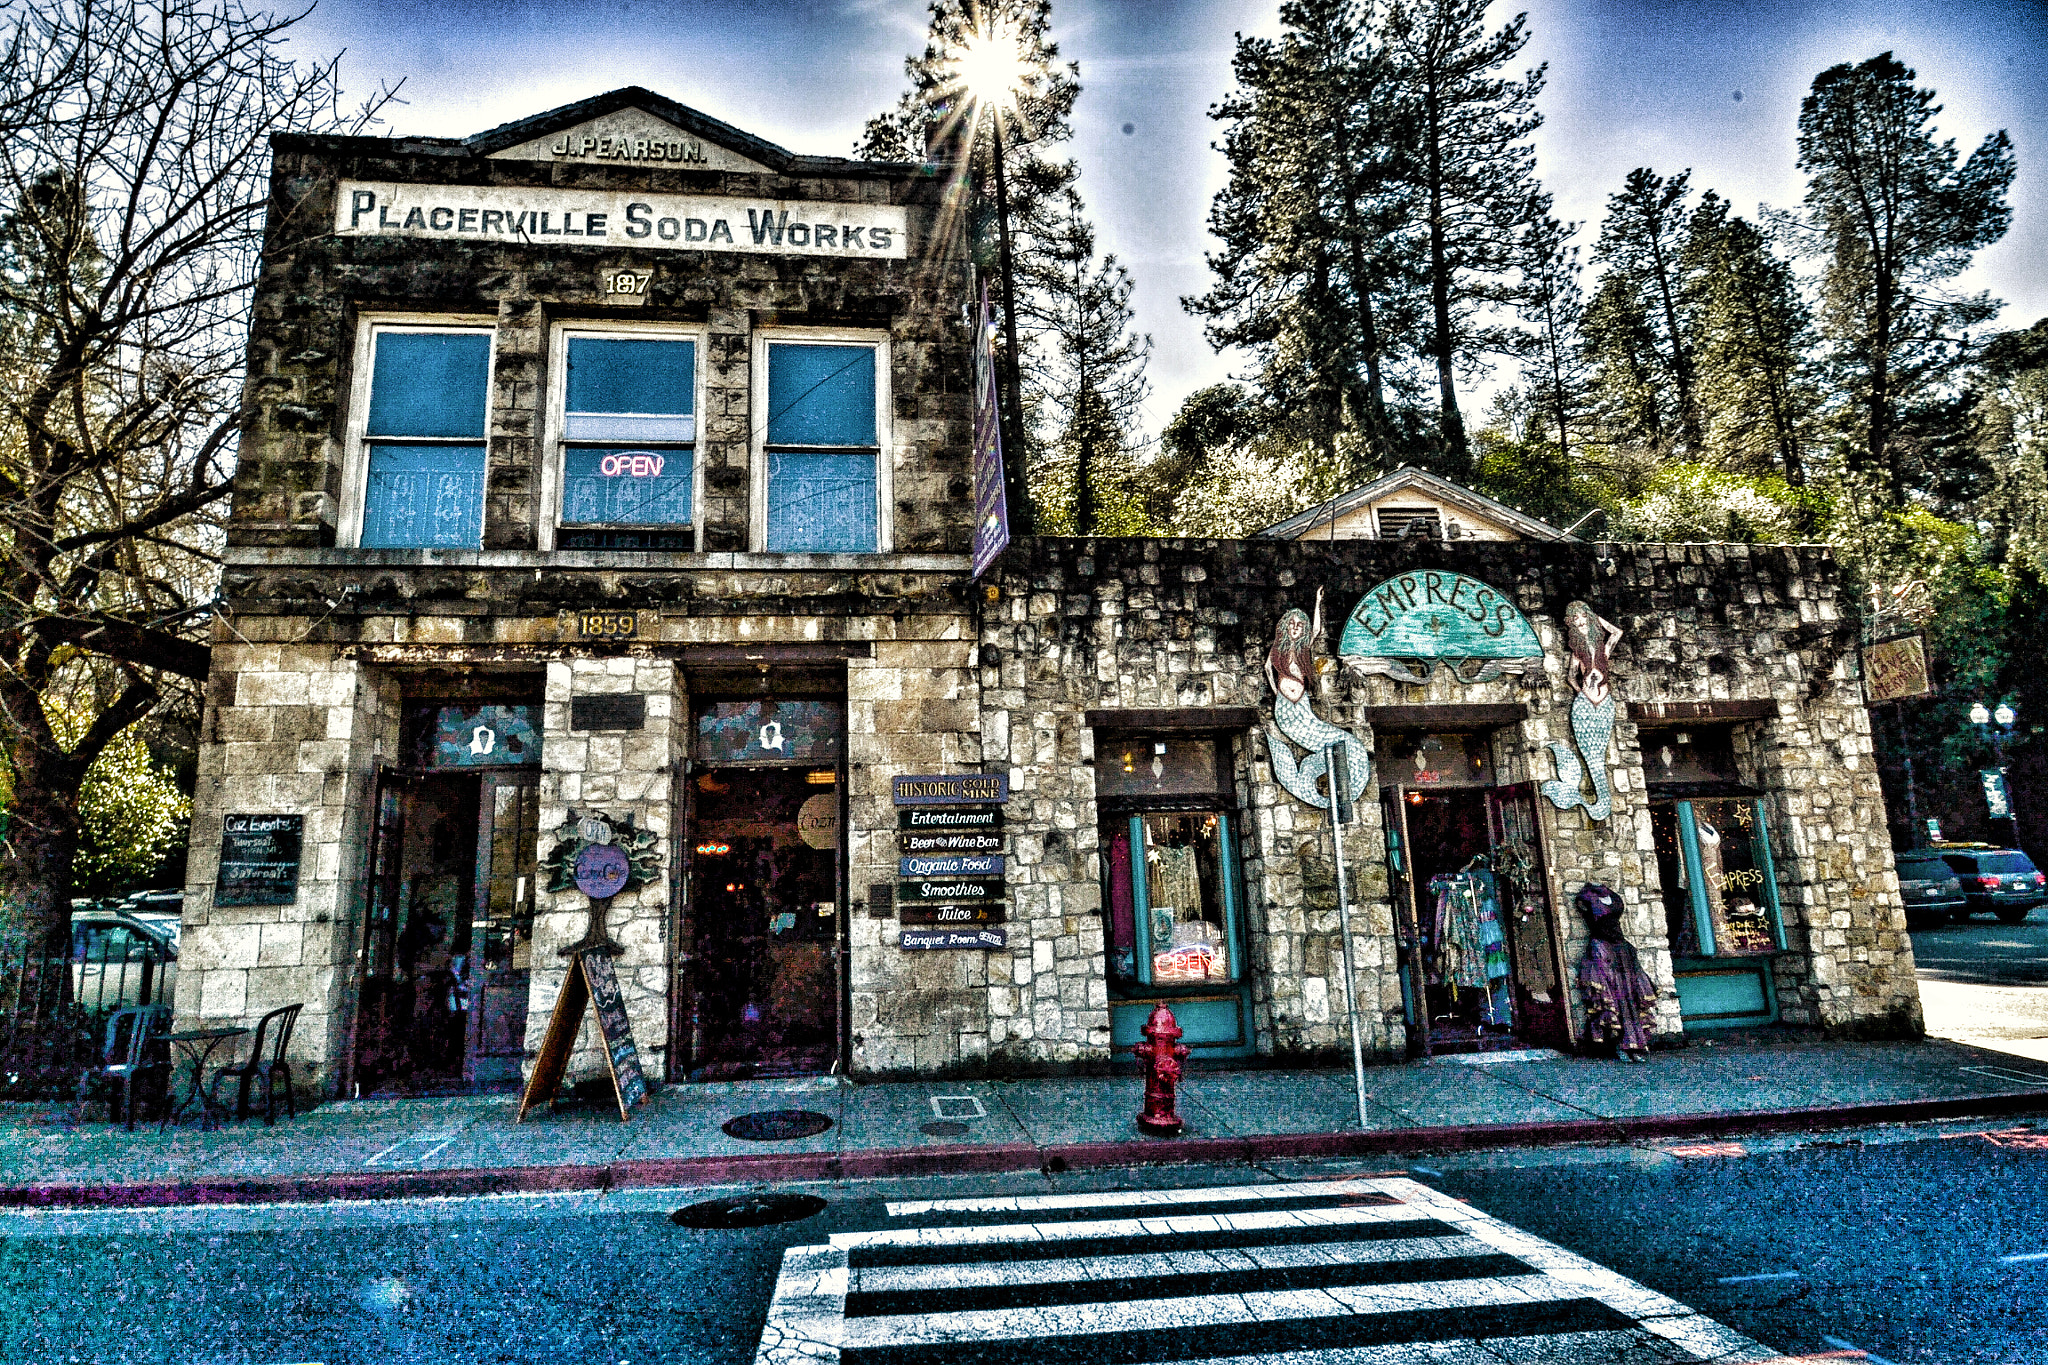 Tamron SP AF 10-24mm F3.5-4.5 Di II LD Aspherical (IF) sample photo. A very old building in downtown placerville,ca. i tweaked the picture to give it a different effect photography